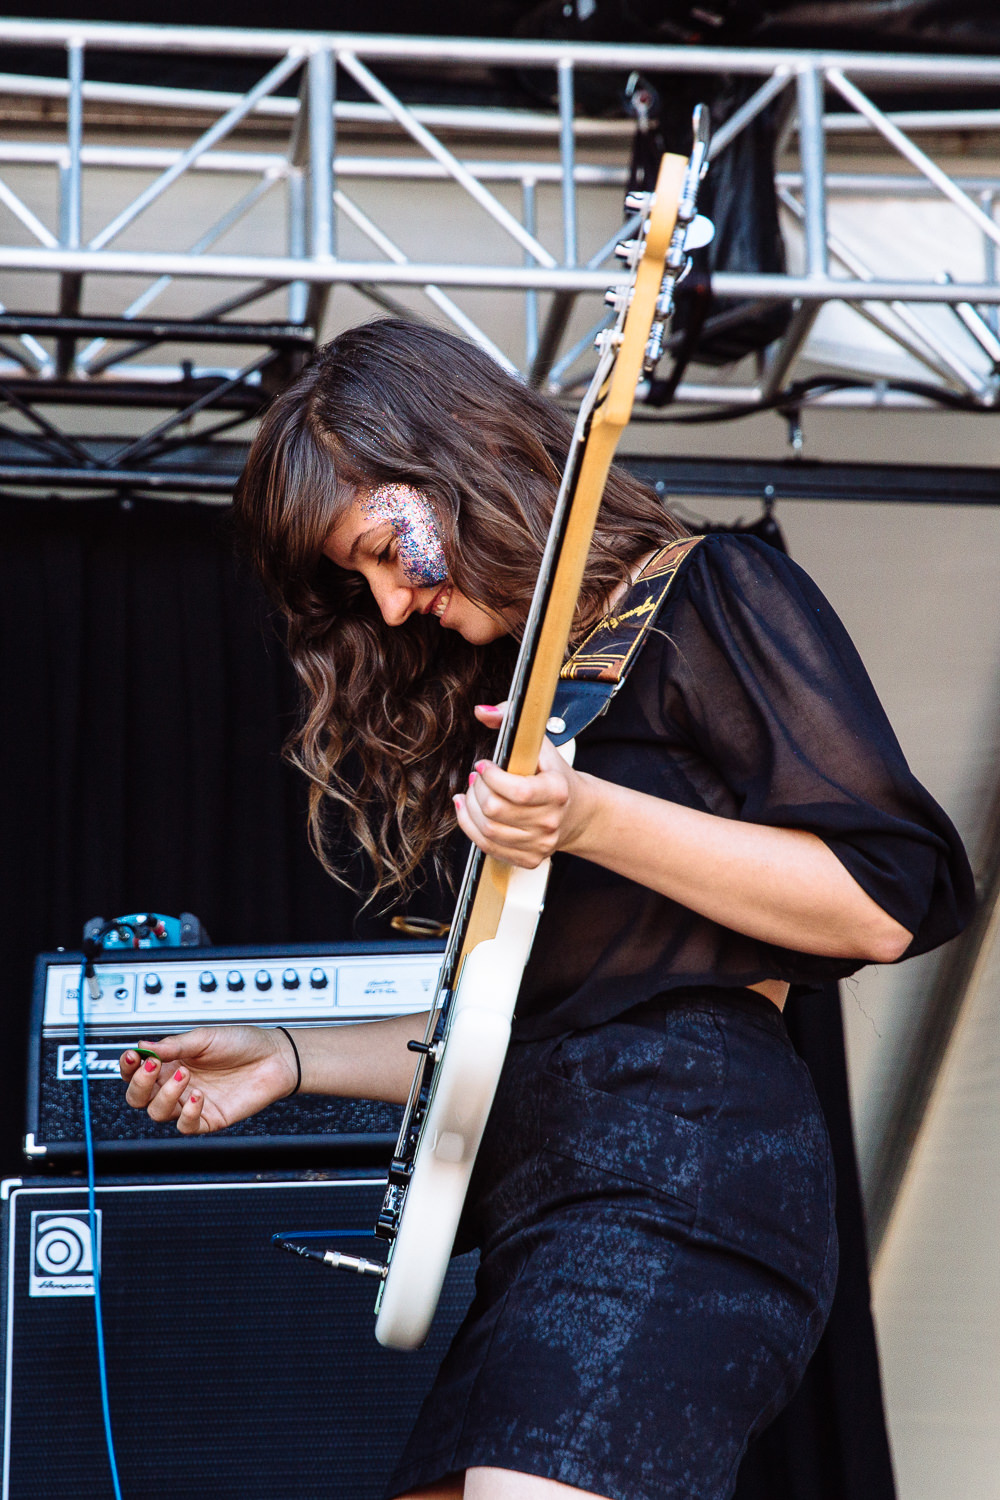 Camp Cope on Laneway Festival Adelaide, by Matt Walter